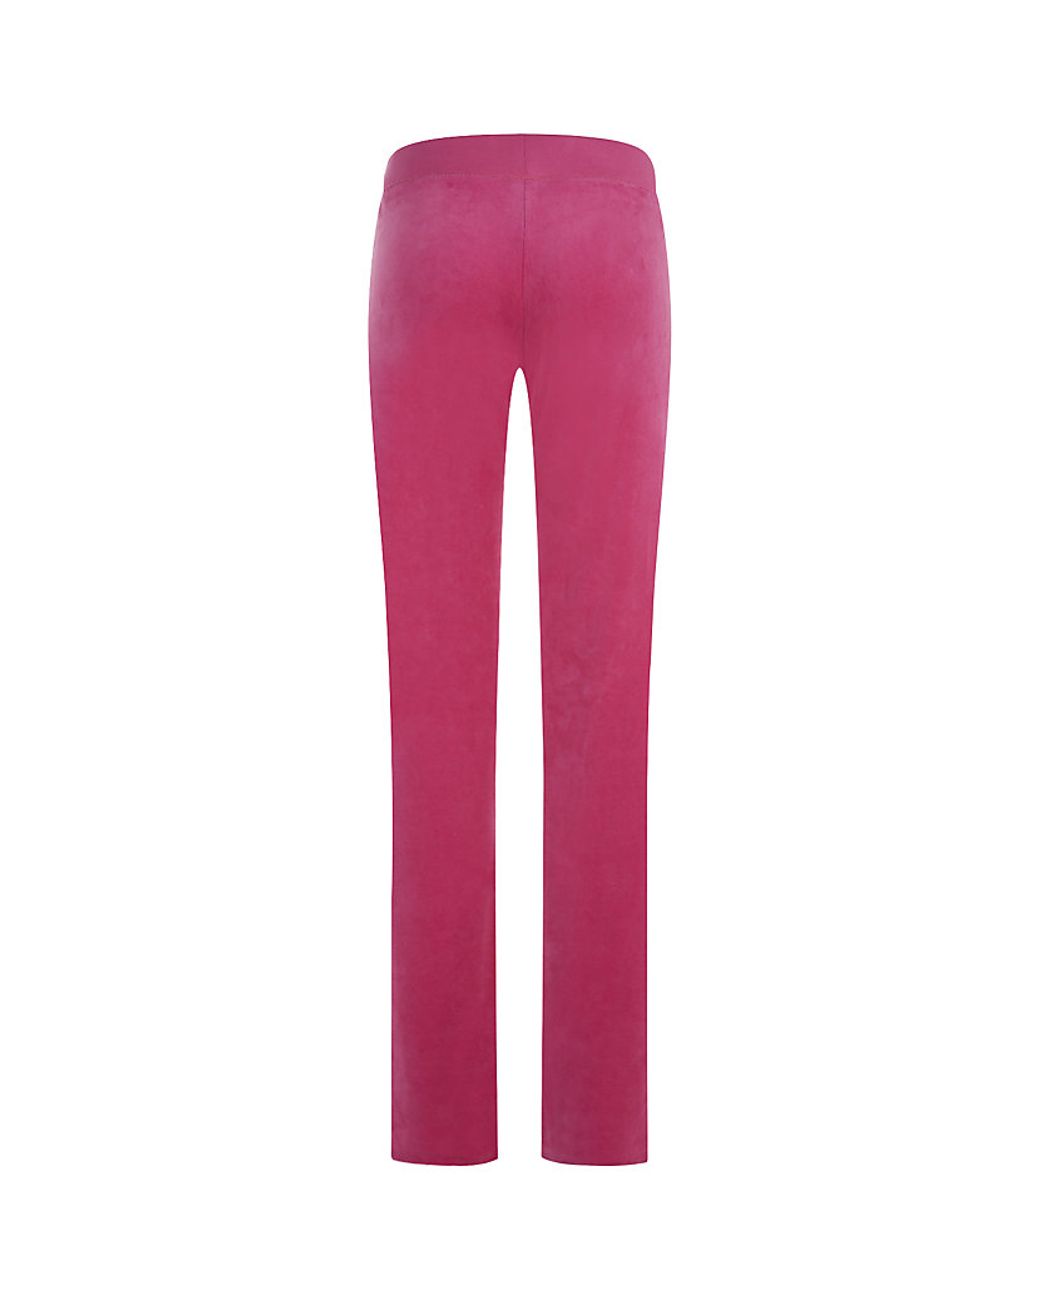 https://cdna.lystit.com/1040/1300/n/photos/2013/08/03/juicy-couture-pink-choose-juicy-velour-tracksuit-pants-in-hot-pink-product-2-12405198-892944510.jpeg